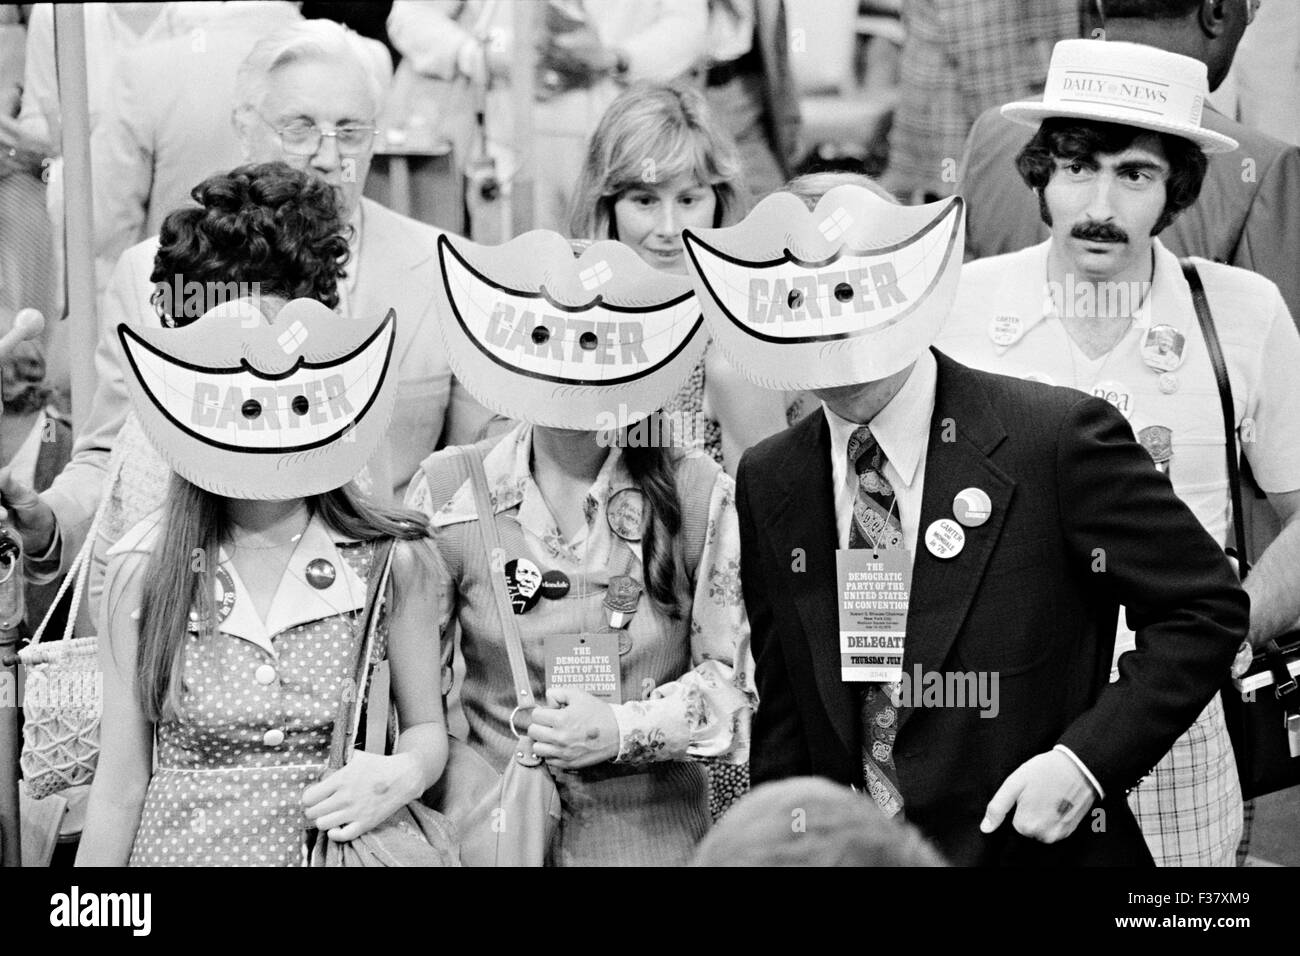 Delegates wearing Jimmy Carter smile masks at the Democratic National Convention July 15, 1976 in New York, NY. Stock Photo